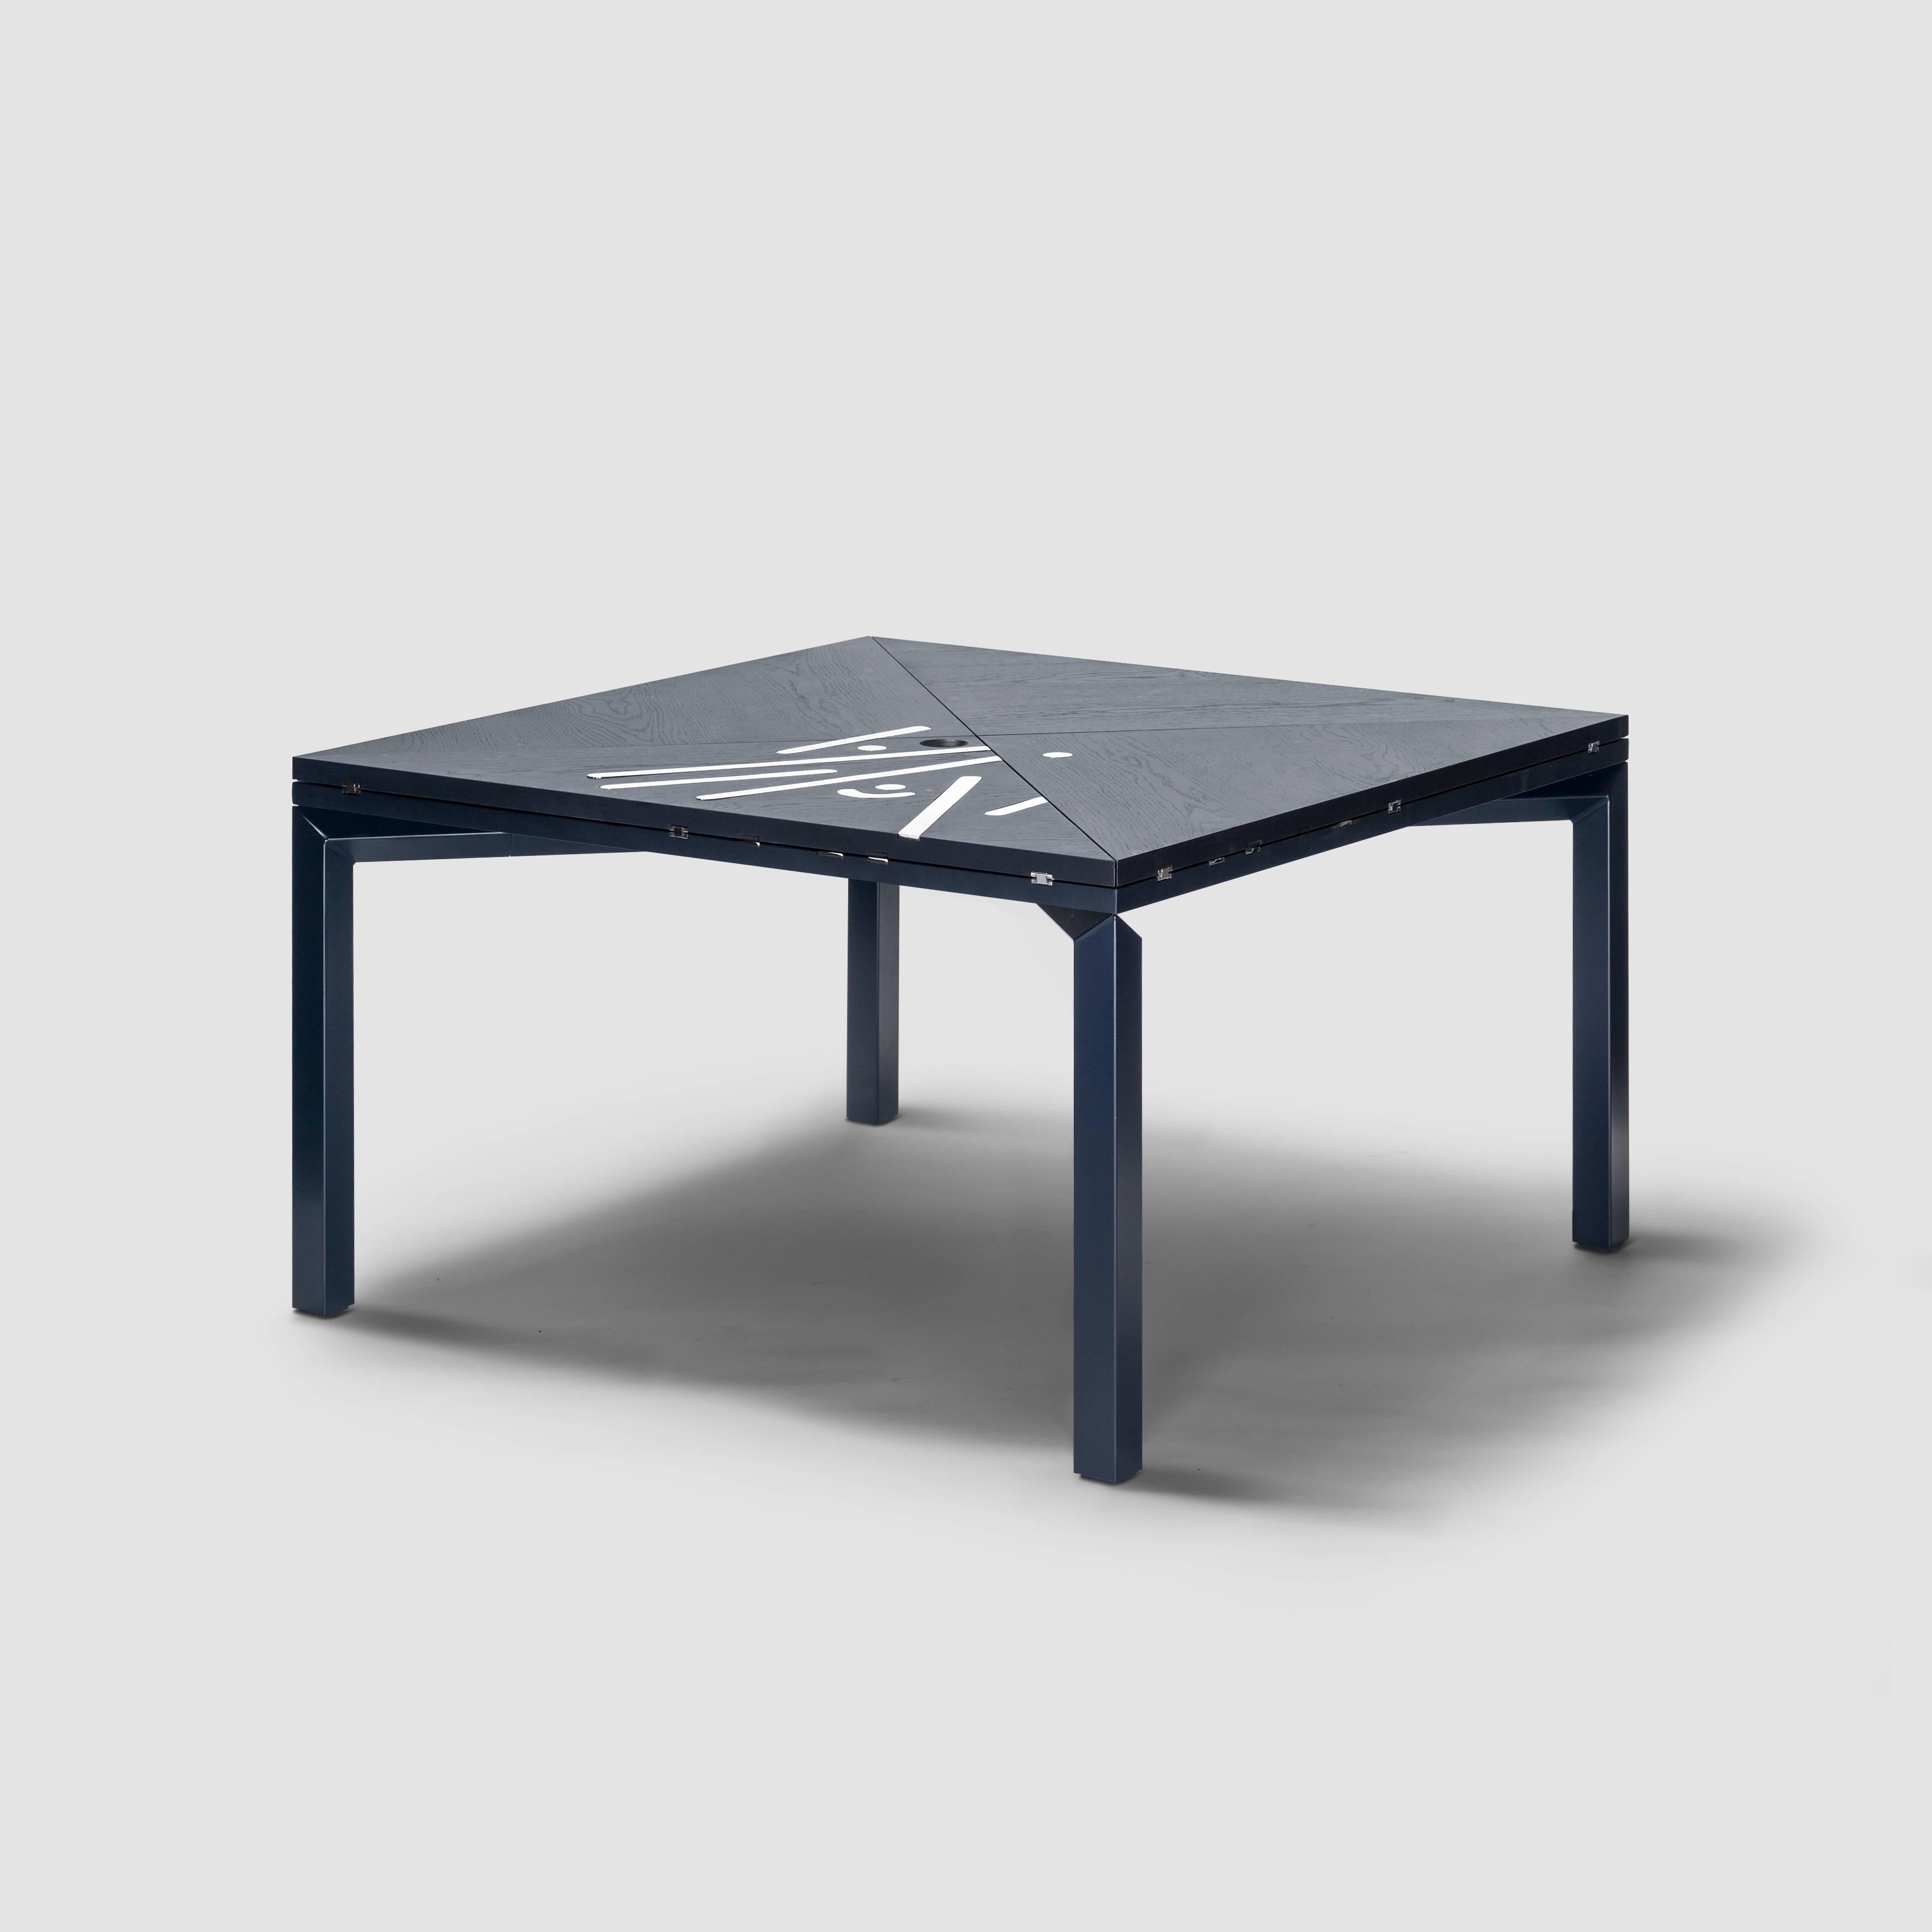 Limited Edition Alella Table by Lluís Clotet for BD In New Condition For Sale In Barcelona, Barcelona